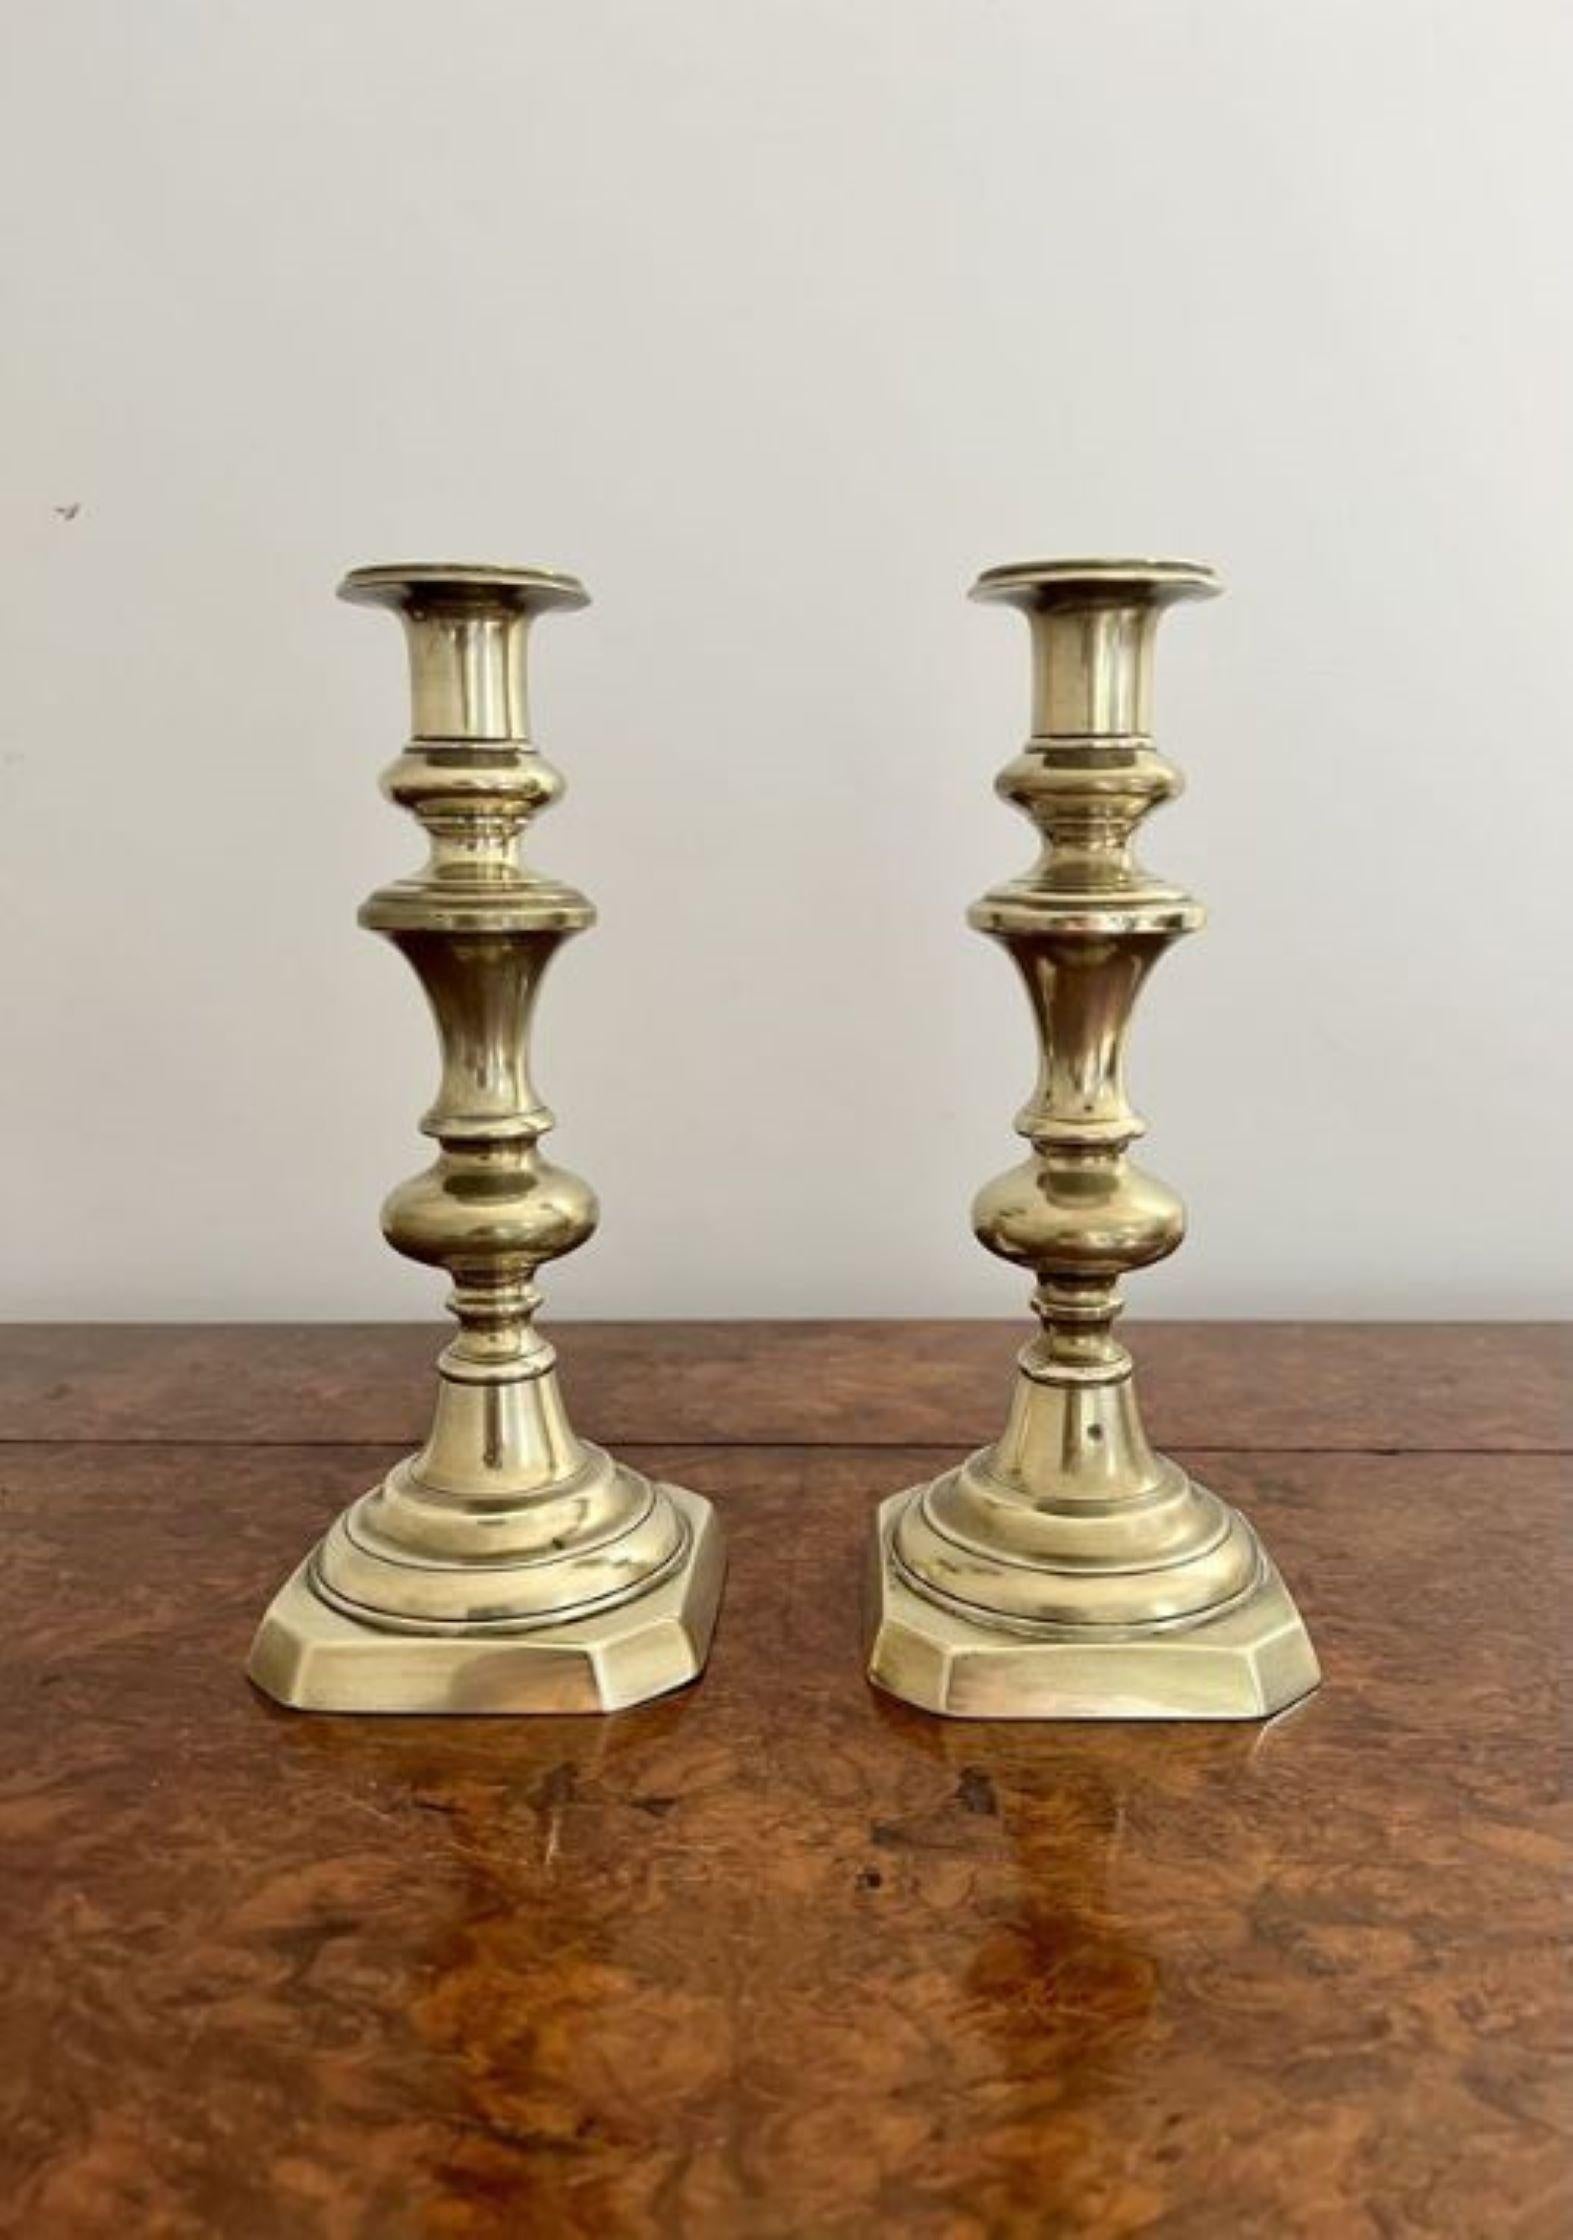 Pair of antique Victorian brass candlesticks having a pair of Victorian candlesticks with shell shaped bases, shaped columns, circular drip trays & ring turned engraving. 